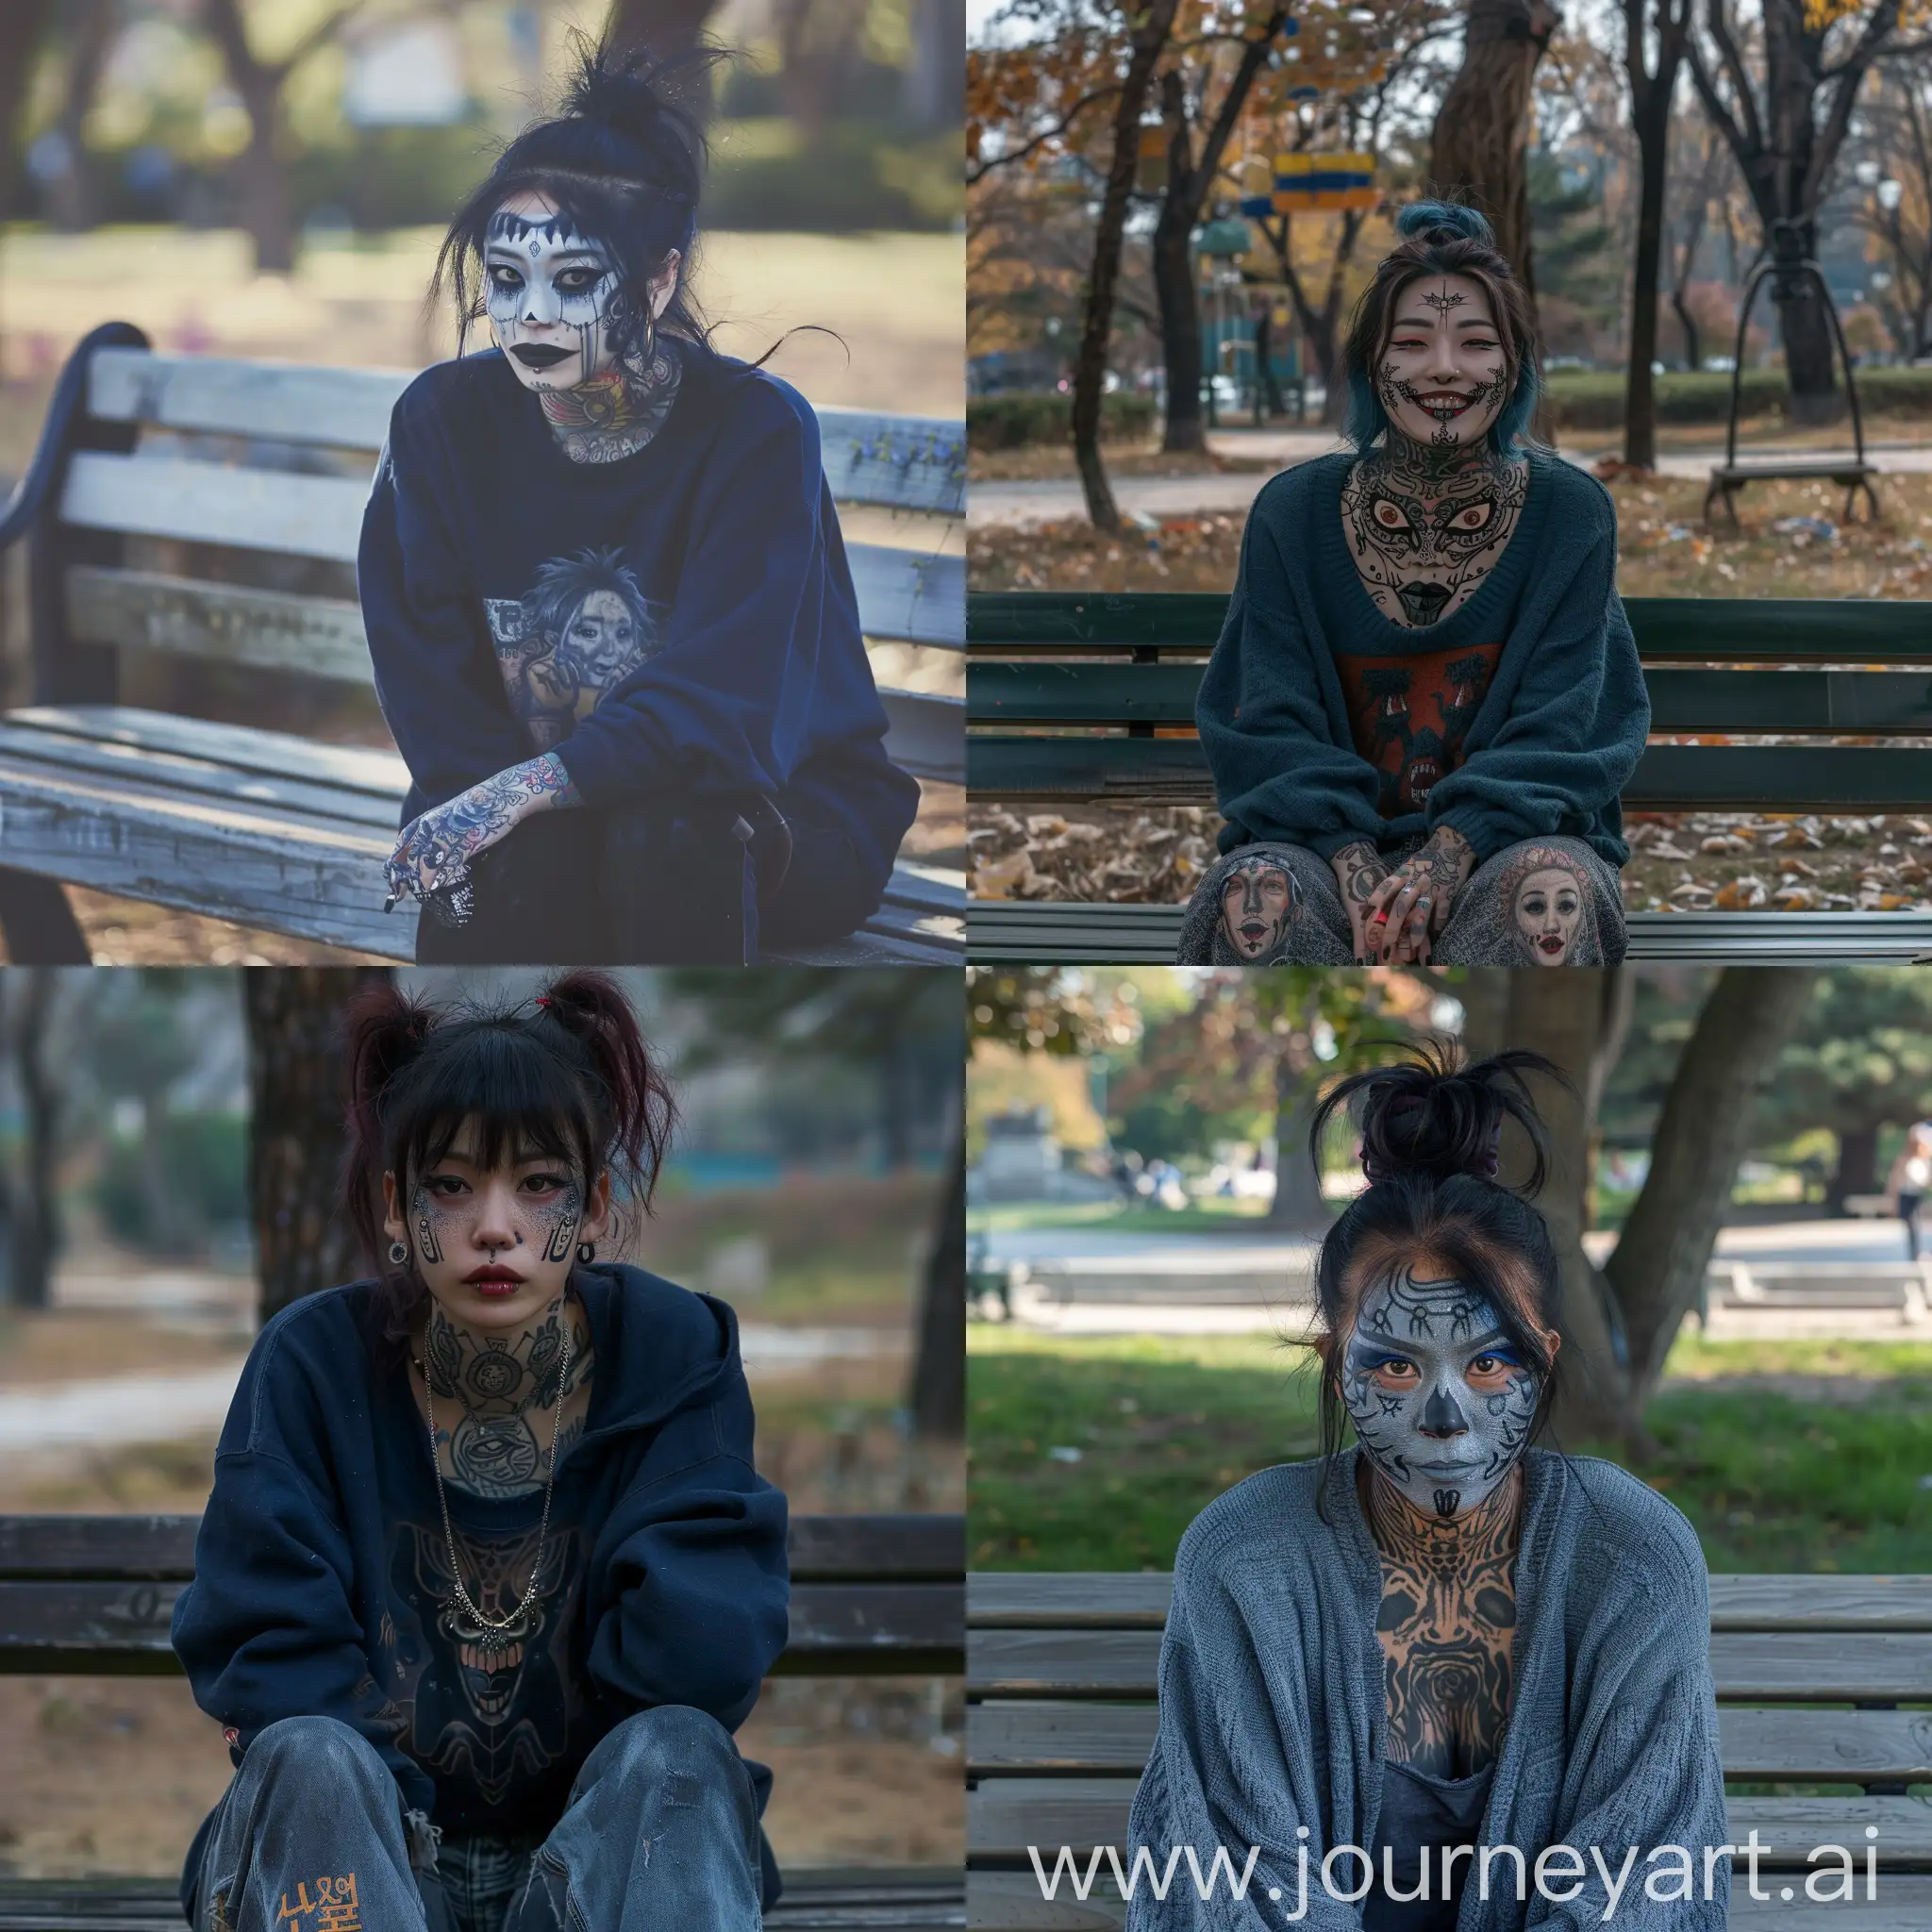 korean woman, punk, heavily tattooed, juggalette facetattoo, tattooed monobrow, juggalette facetattoo, symmetric mask-like tattoo, homemade crooked tattoos, blurry faded tattoos, dark gray tattooed lips, punk goth, wearing dirty blue sweater, disheveled unkempt hair, sitting on park bench, tired smile, looking at viewer, photo photorealistic